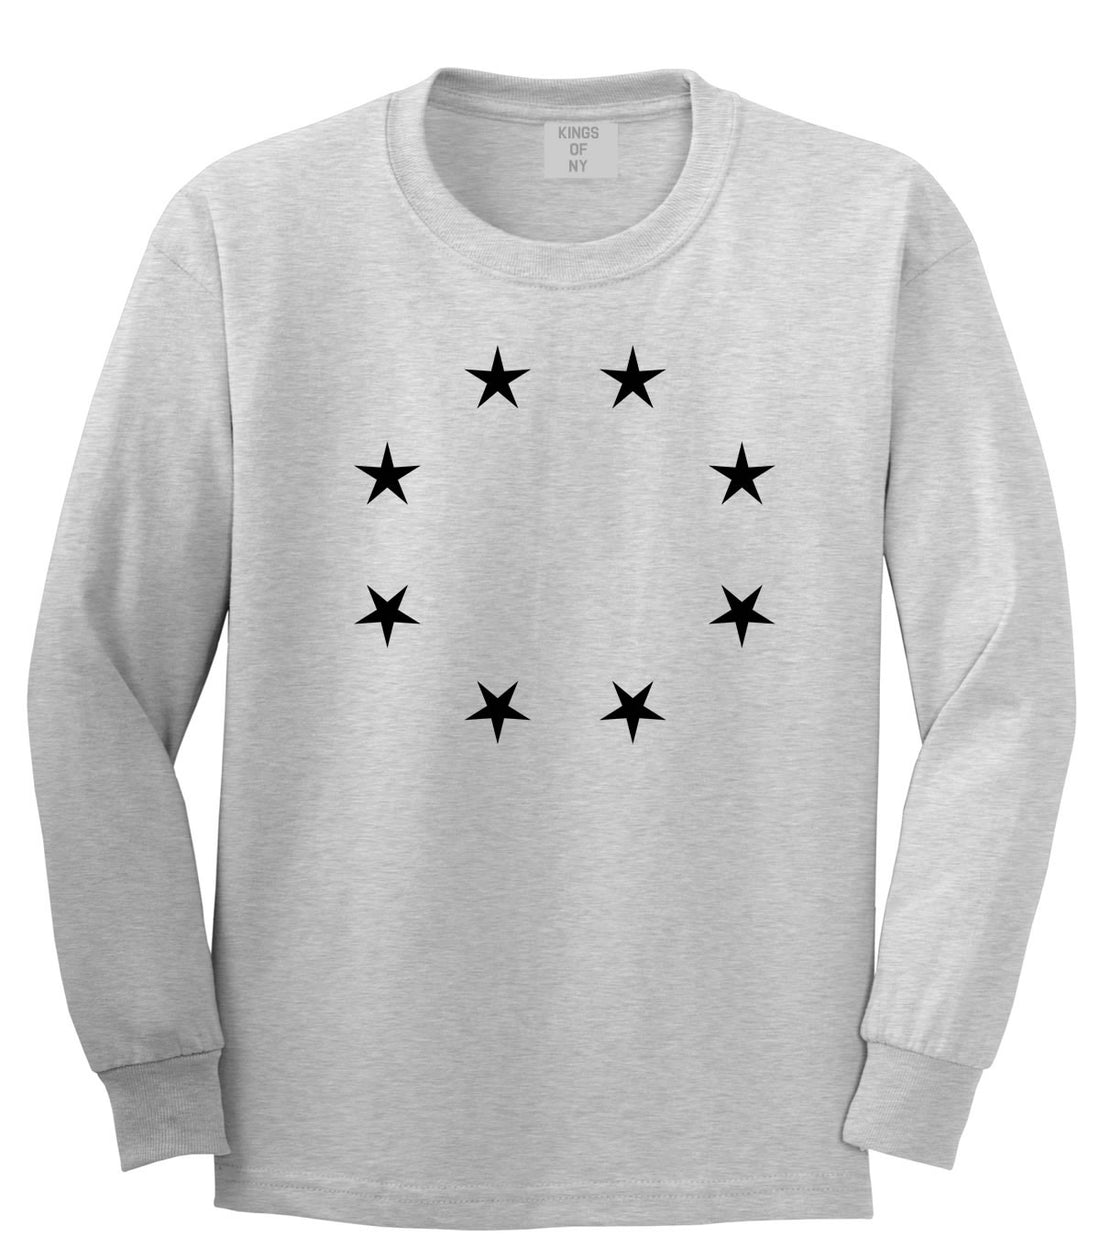 Stars Circle Scale Black by Kings Of NY True Goth Ghetto Long Sleeve Boys Kids T-Shirt In Grey by Kings Of NY